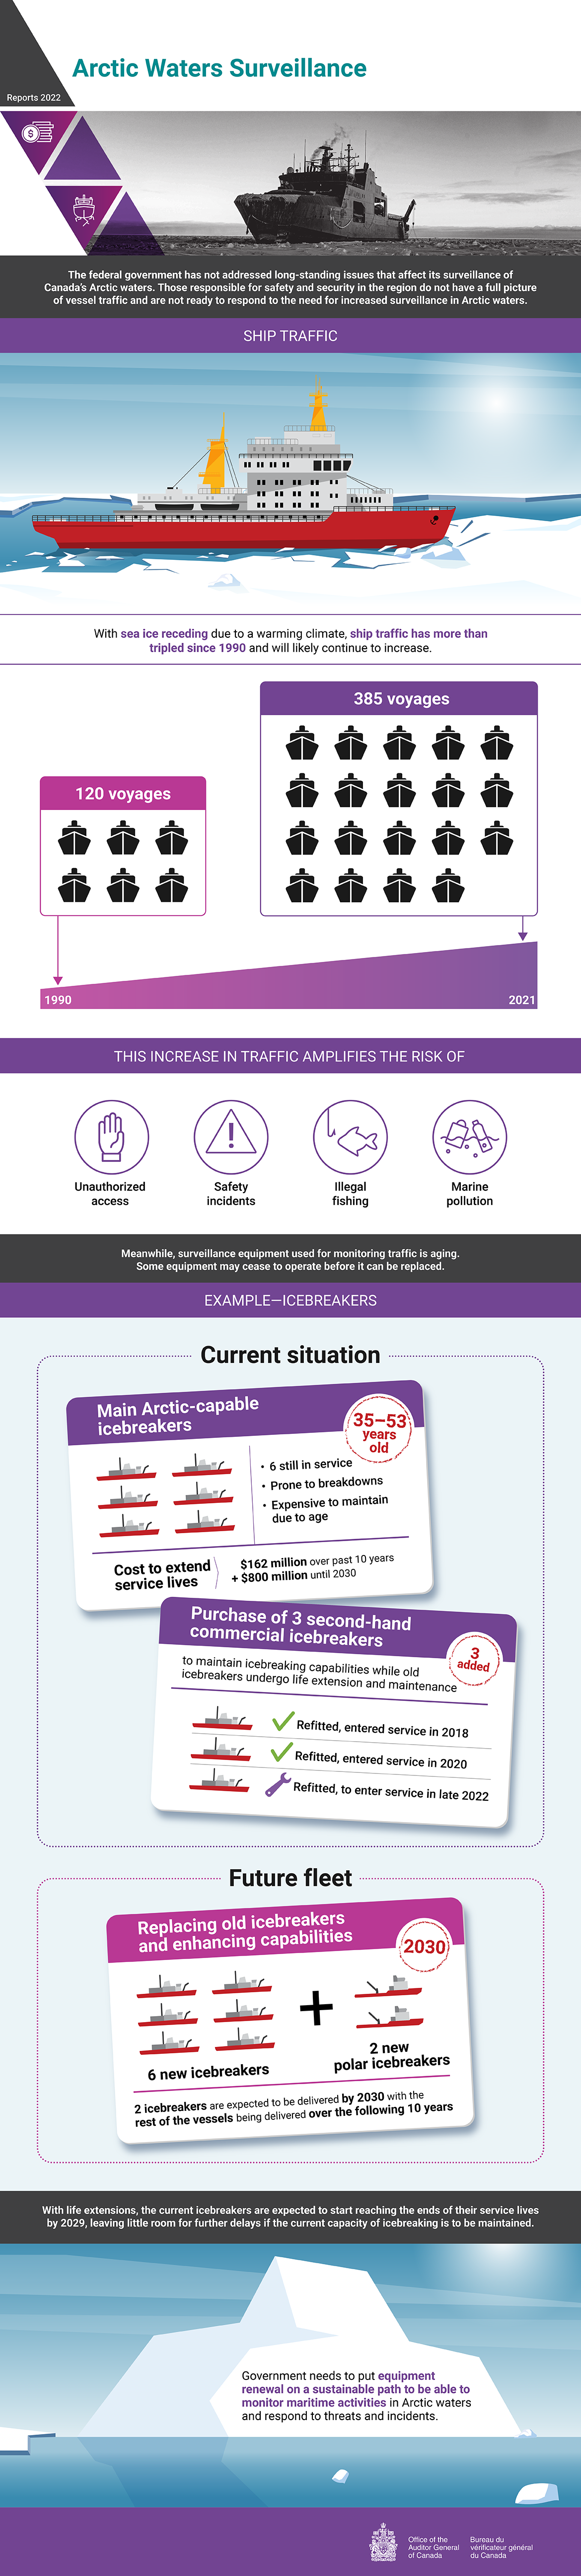 This infographic presents findings from the 2022 audit report on the surveillance of Canada’s Arctic waters